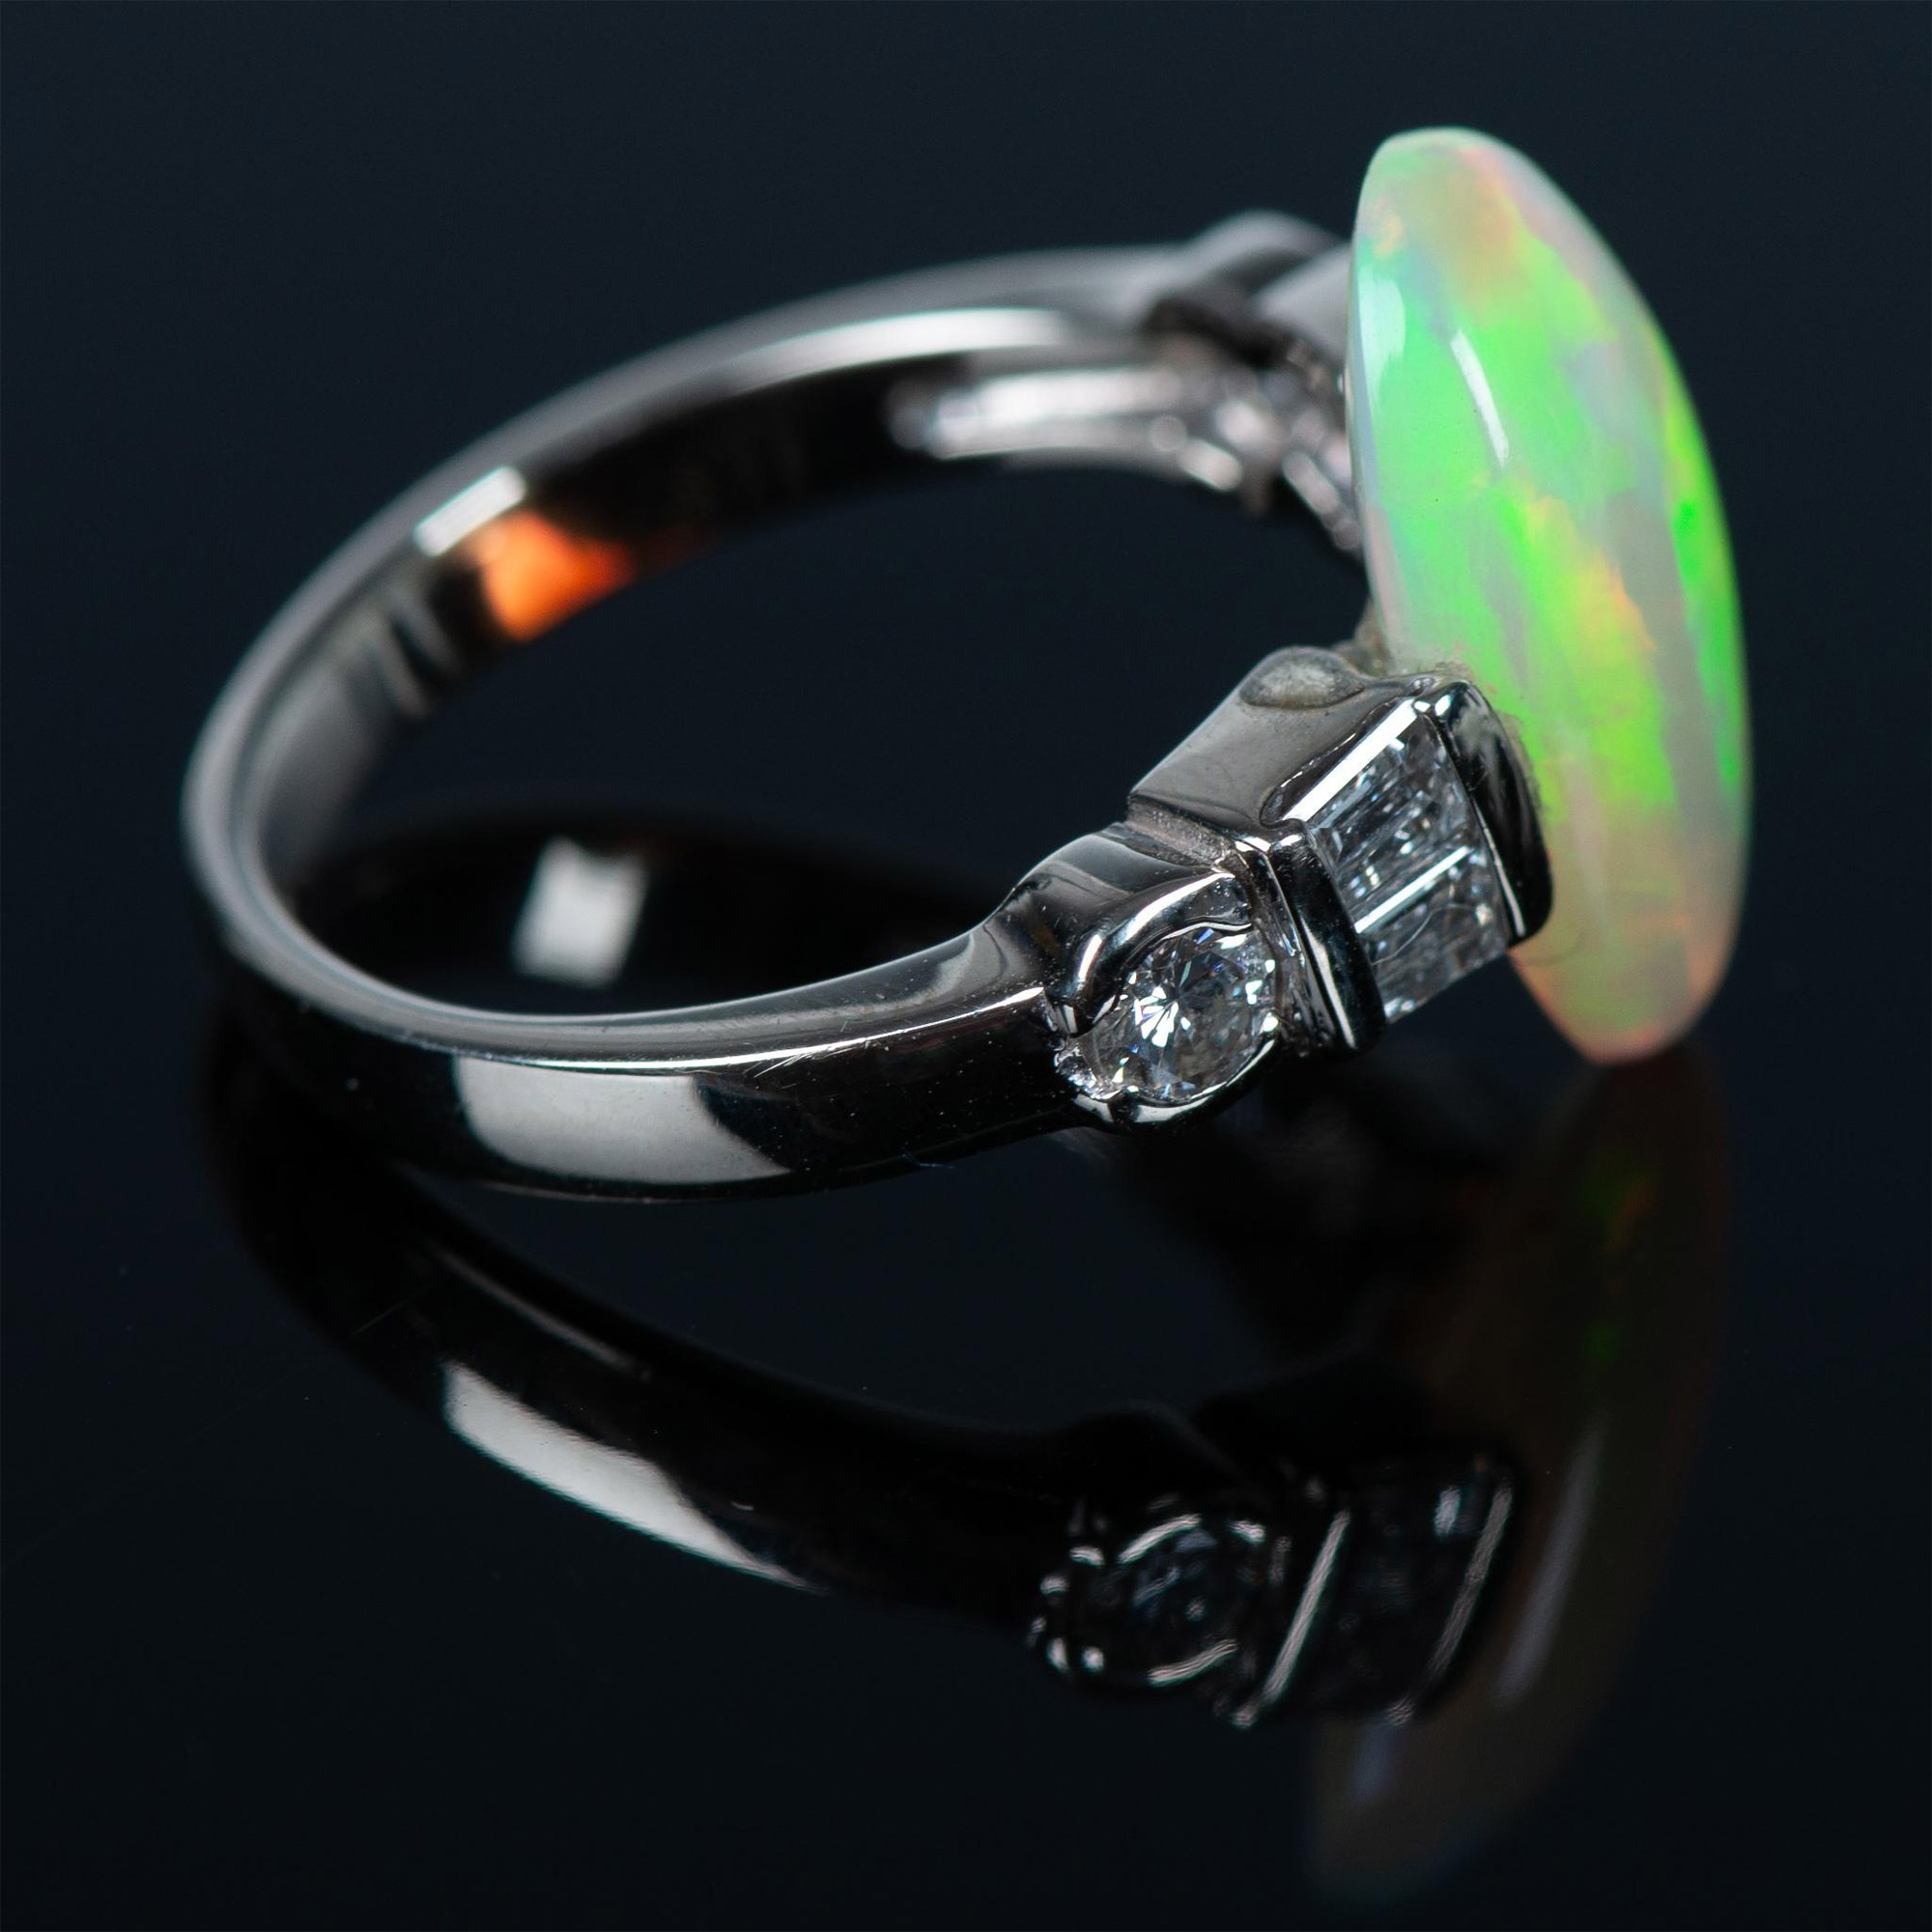 Fabulous 14K White Gold, Diamond, and Opal Ring - Image 4 of 8